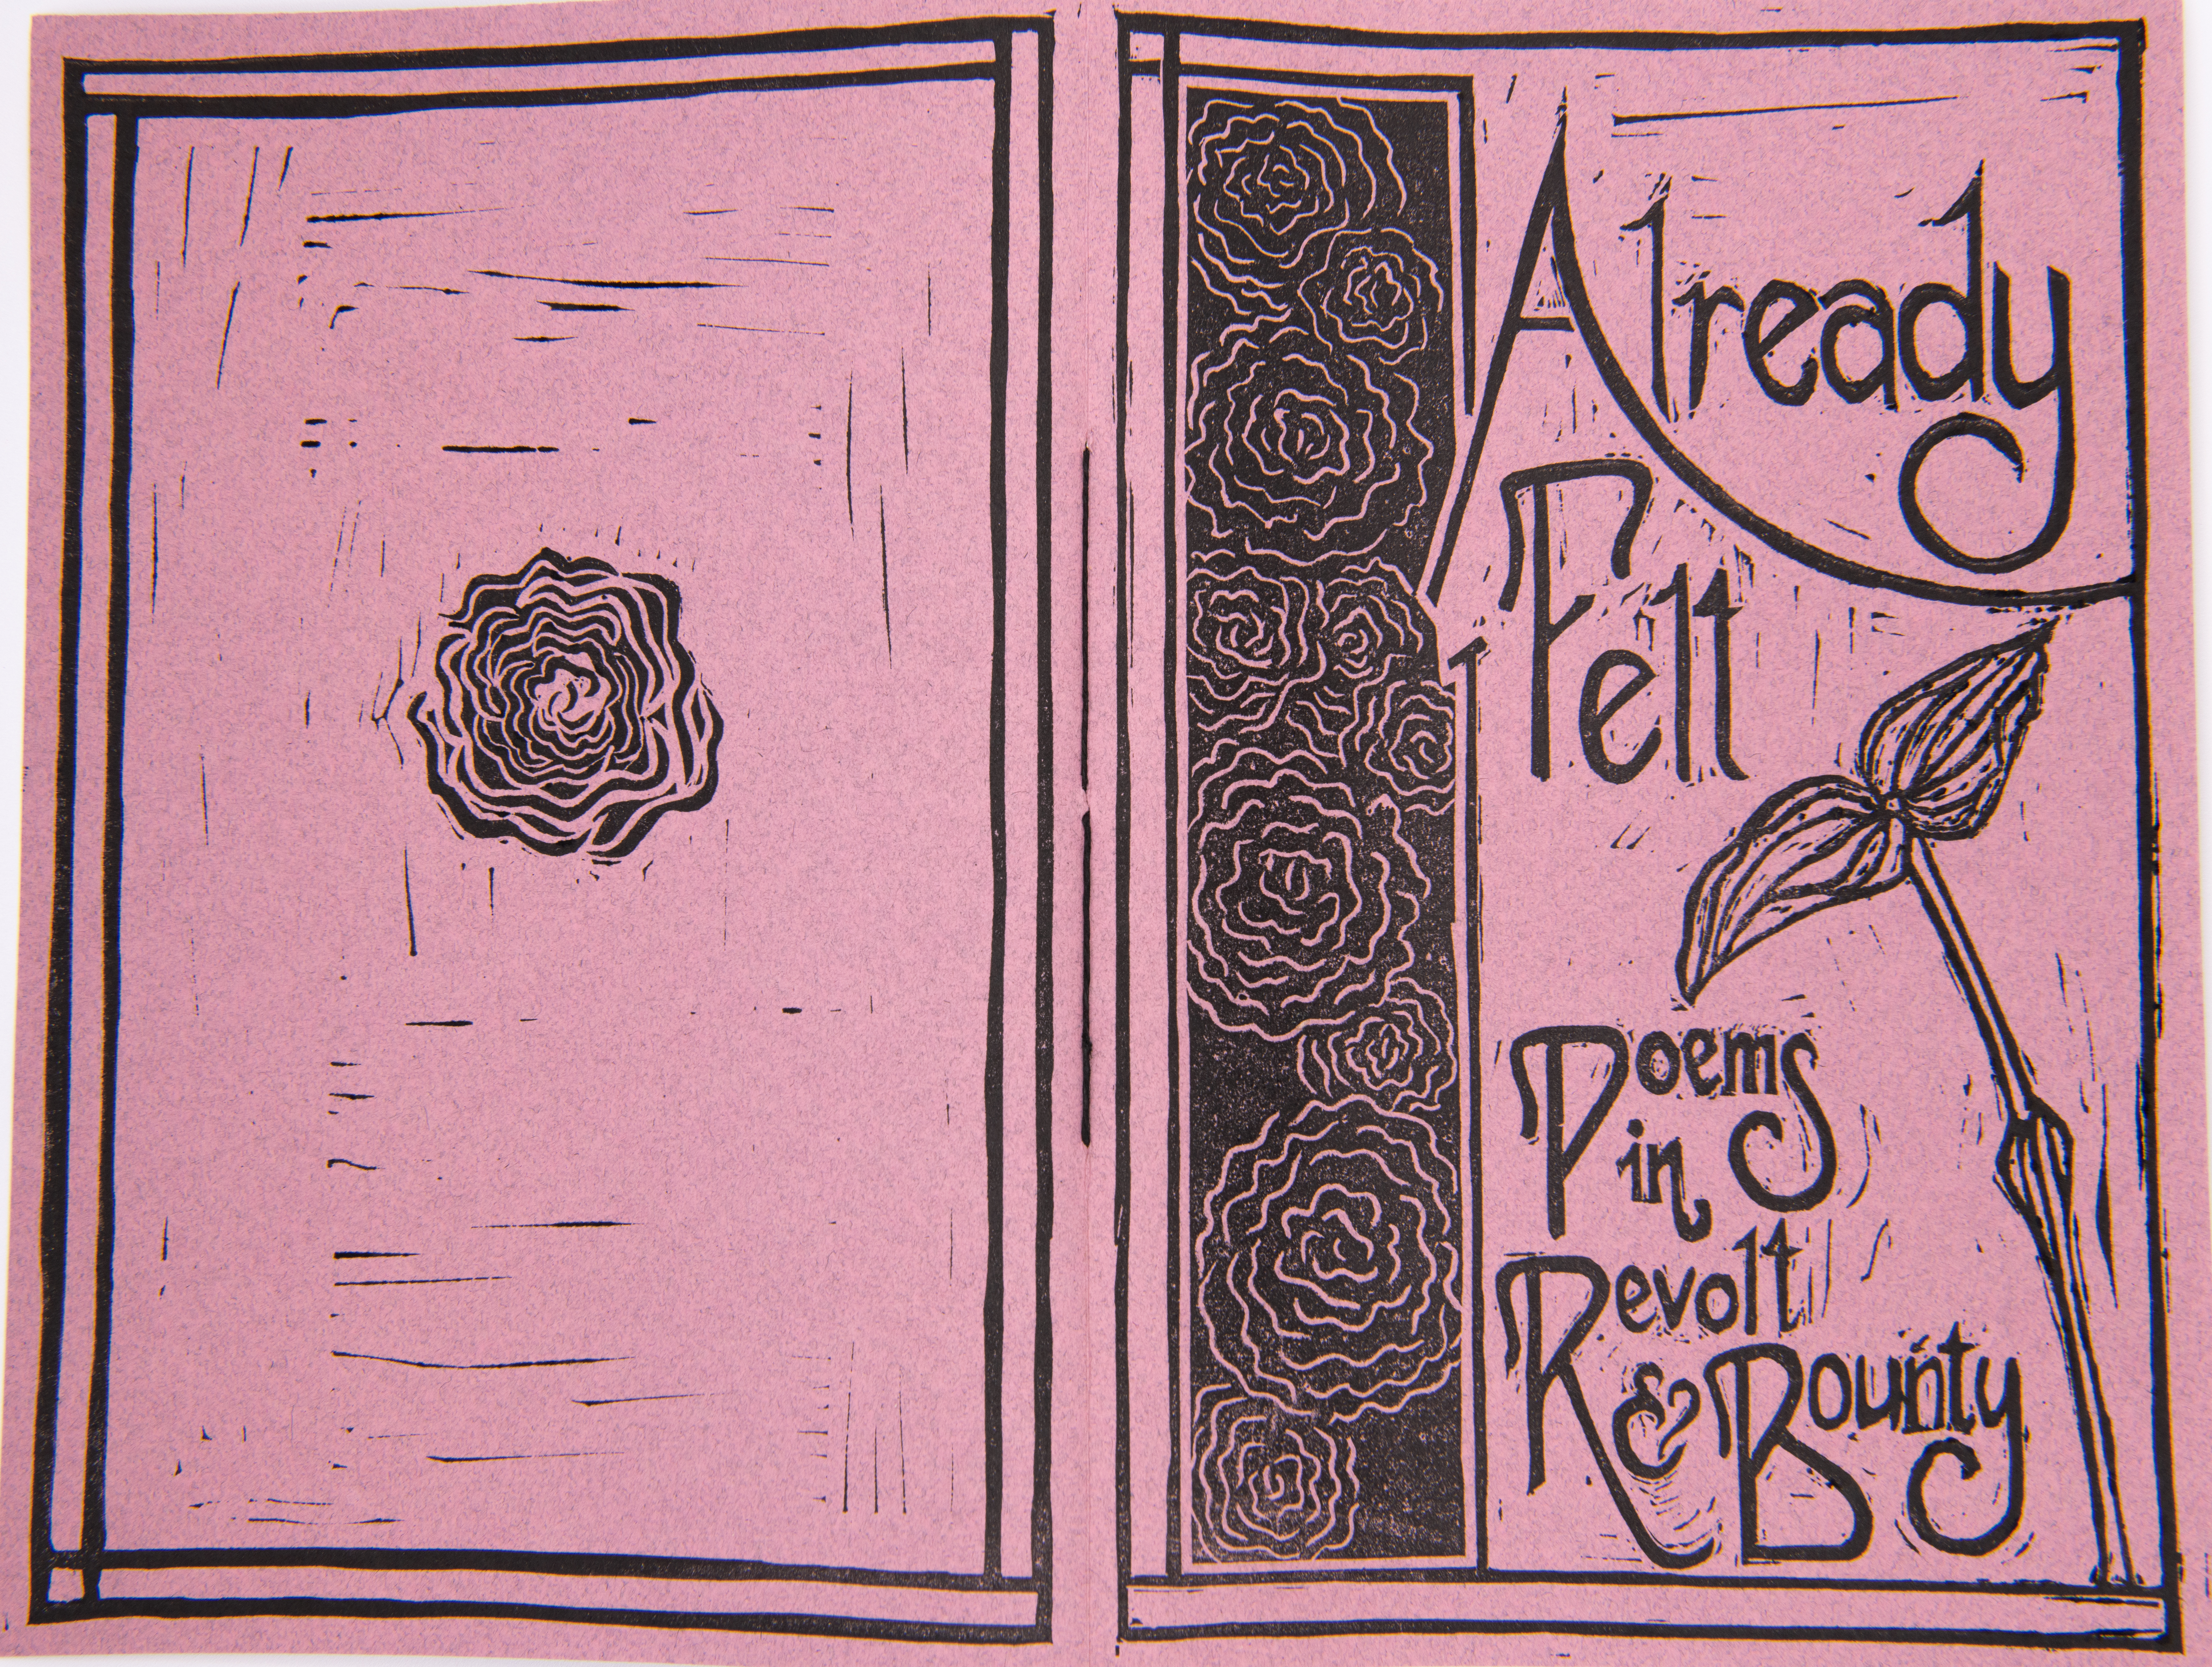 The image is two framed rectangles on one piece of pink paper. The rectangle on the left has a rosette in the center. The rectangle on the right has relief-carved rosettes on the left-hand side, with the words "Already Felt" and "Poems in Revolt and Bounty." there is a pair of leaves on a stem in the right-hand bottom corner. The block is printed in black ink.